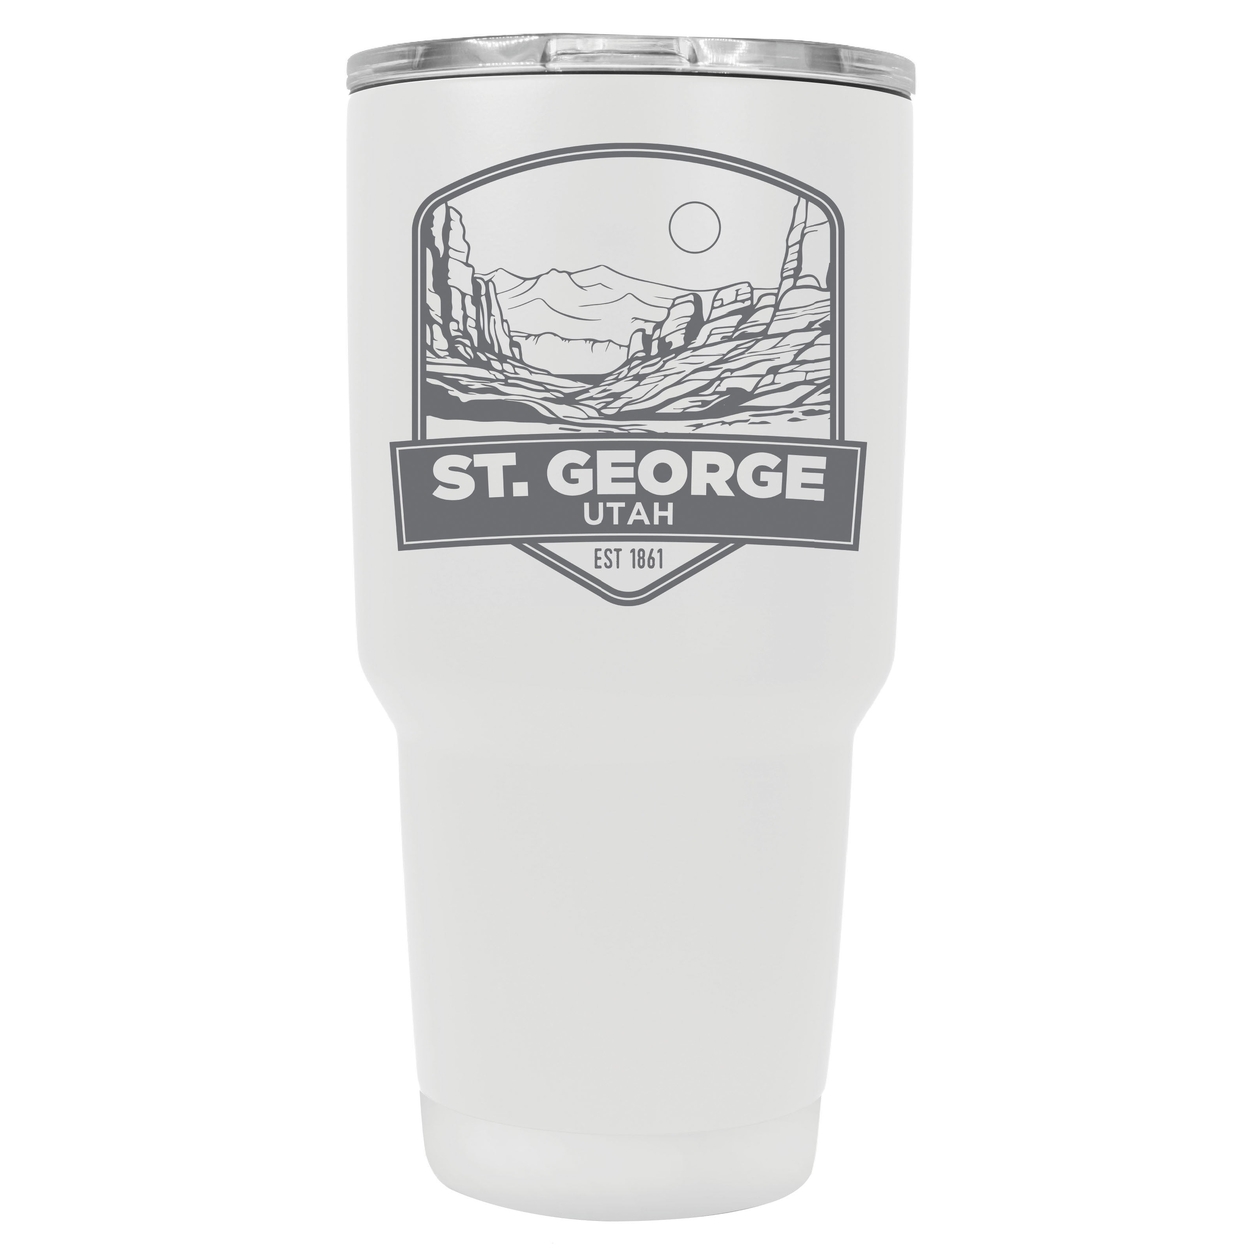 St. George Utah Souvenir 24 Oz Engraved Insulated Stainless Steel Tumbler - White,,4-Pack